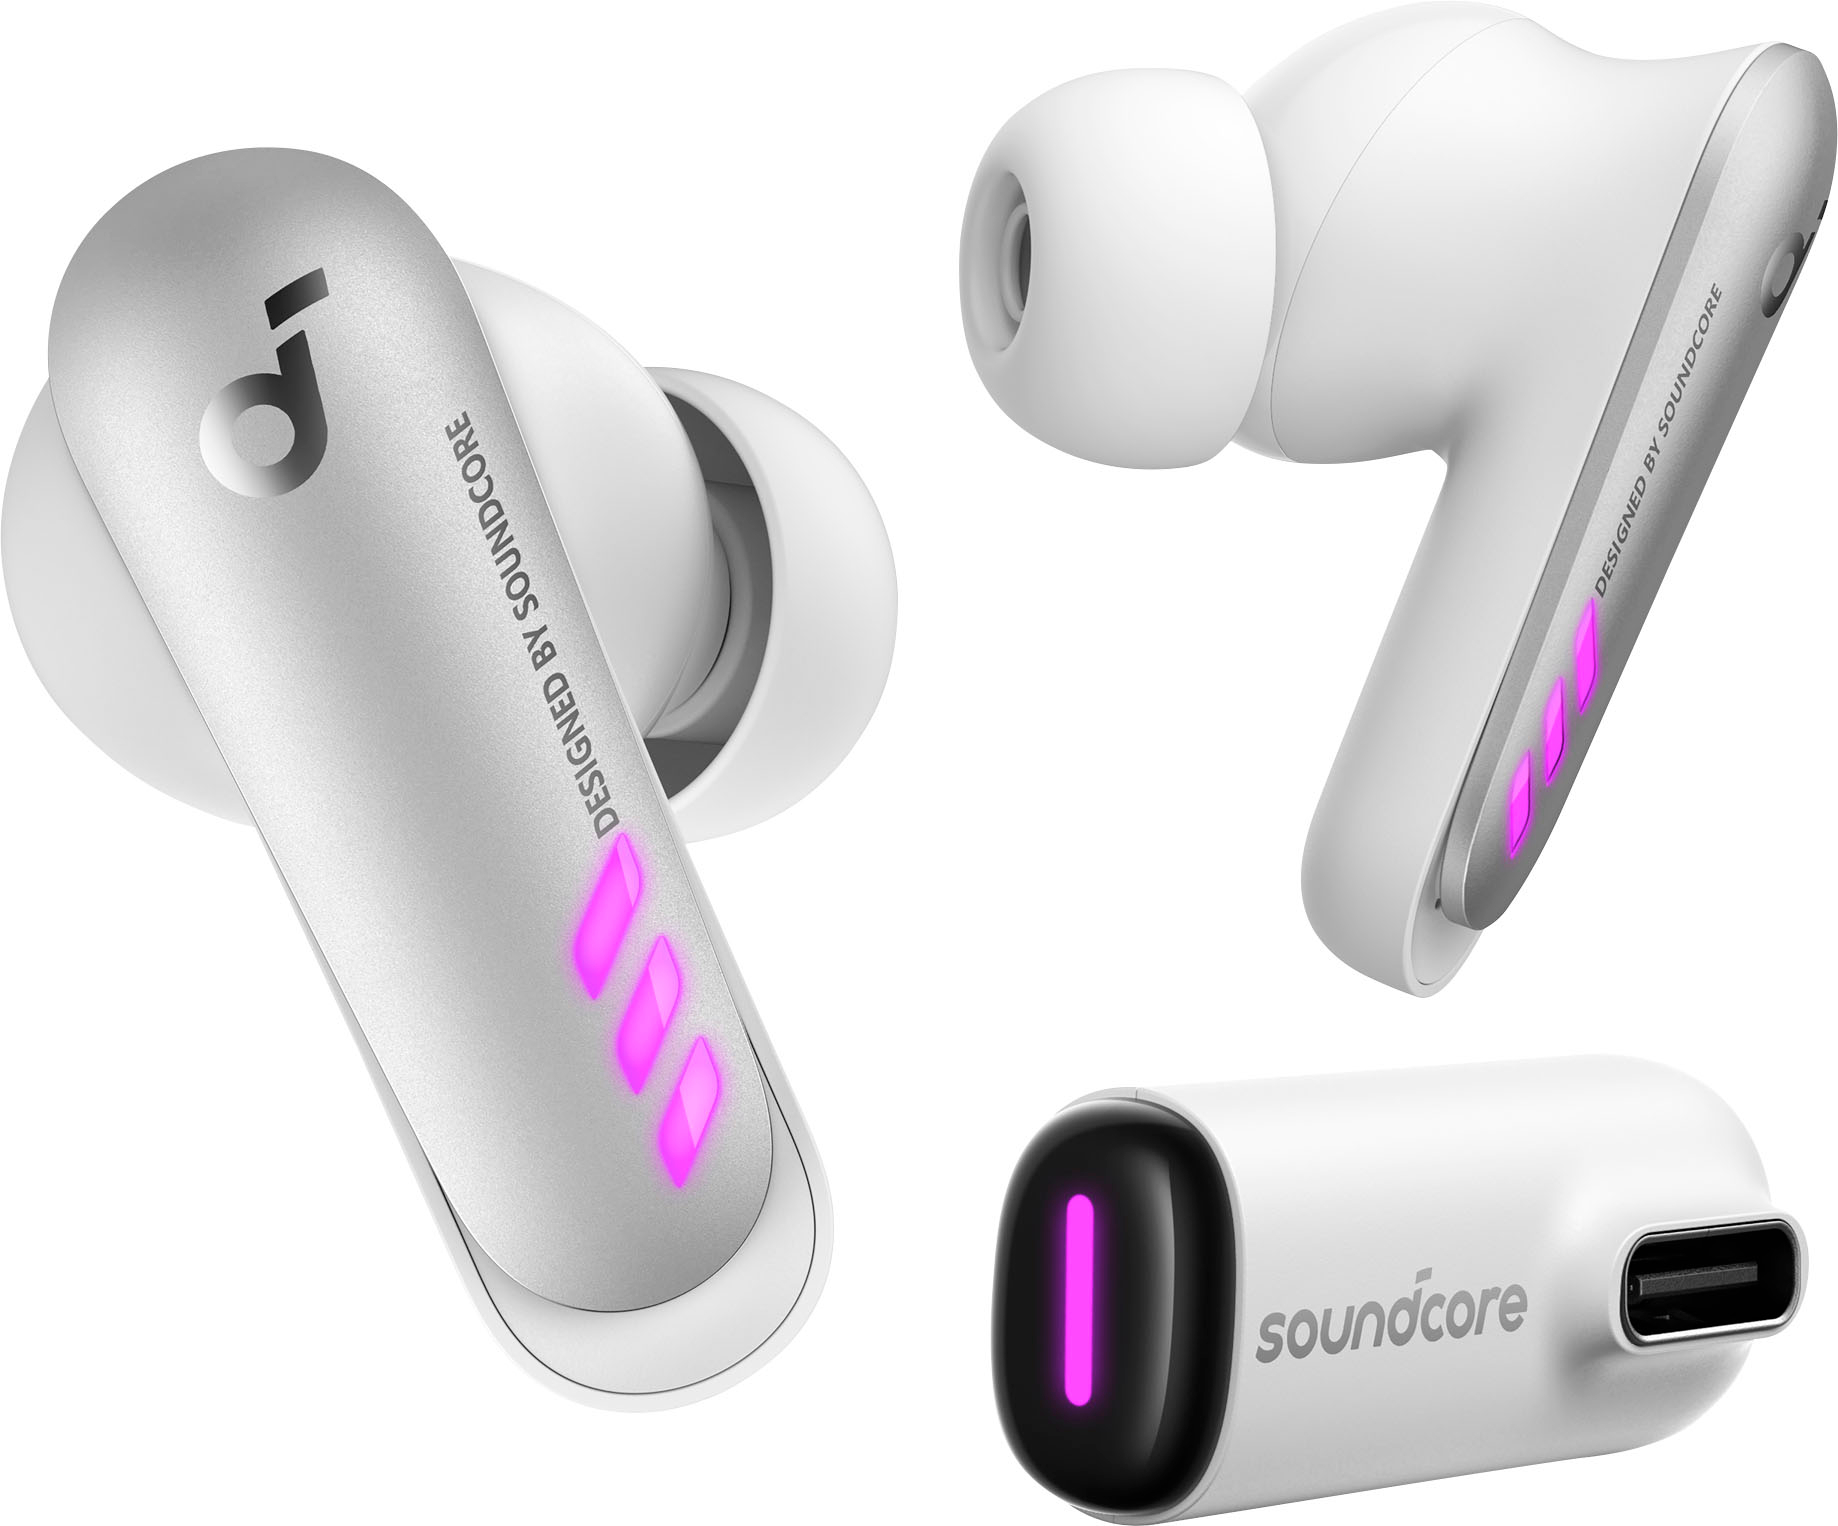 

Soundcore - VR P10 Wireless In-Ear Earbuds for Meta Quest 2 - White